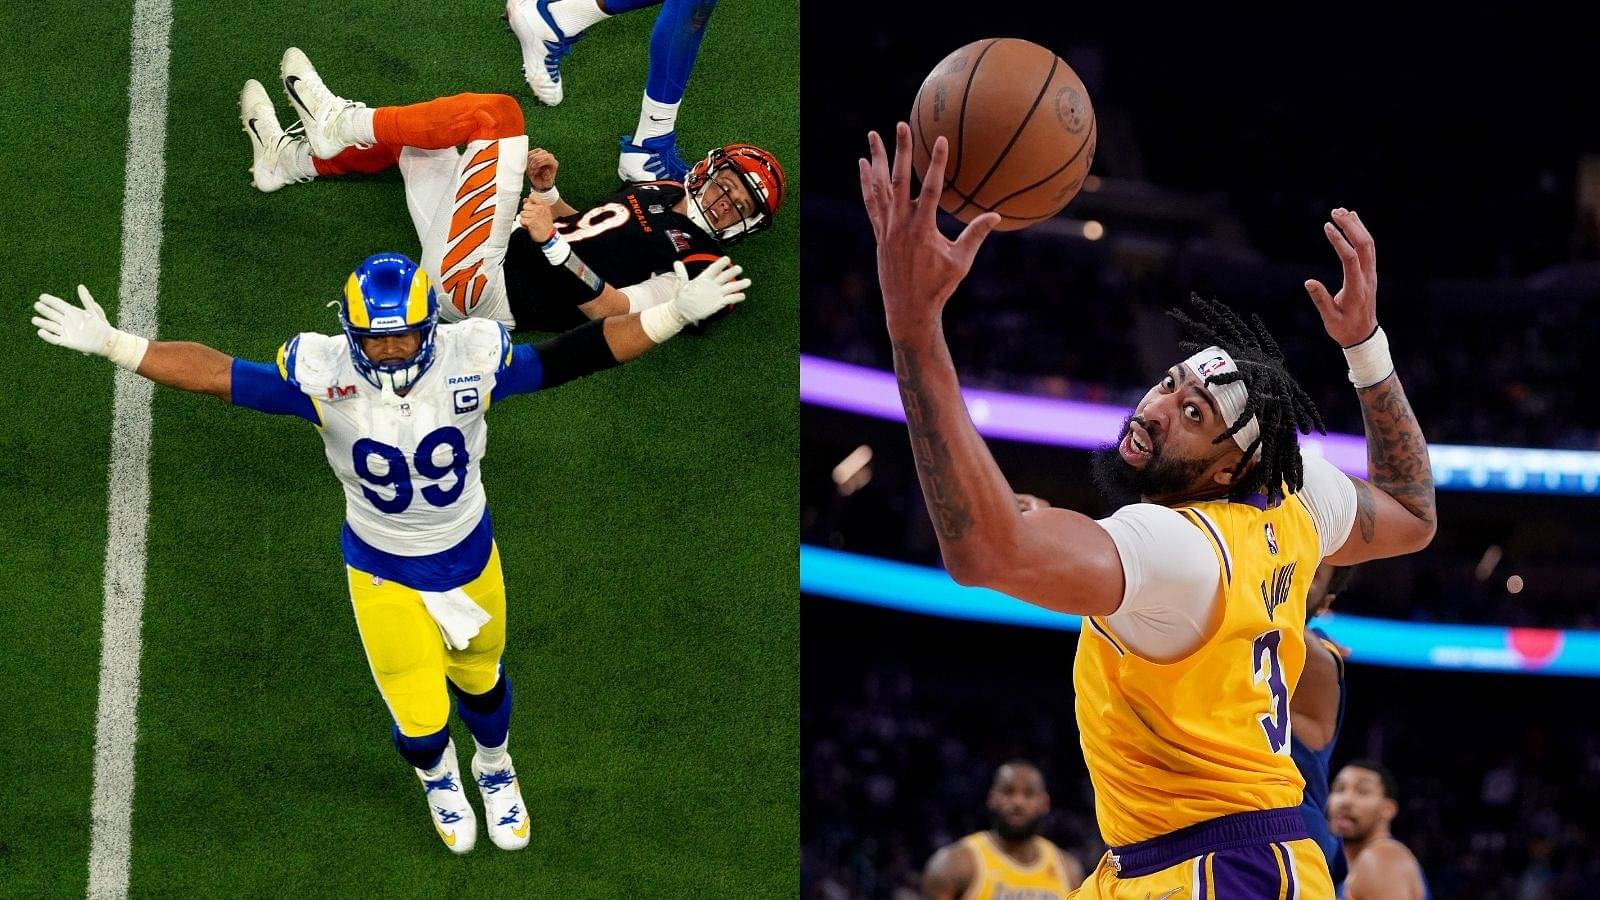 "The real AD in LA is Aaron Donald, not Anthony Davis": Skip Bayless takes shot at Lakers star as Rams' defensive lineman leads the LA team to Super Bowl victory